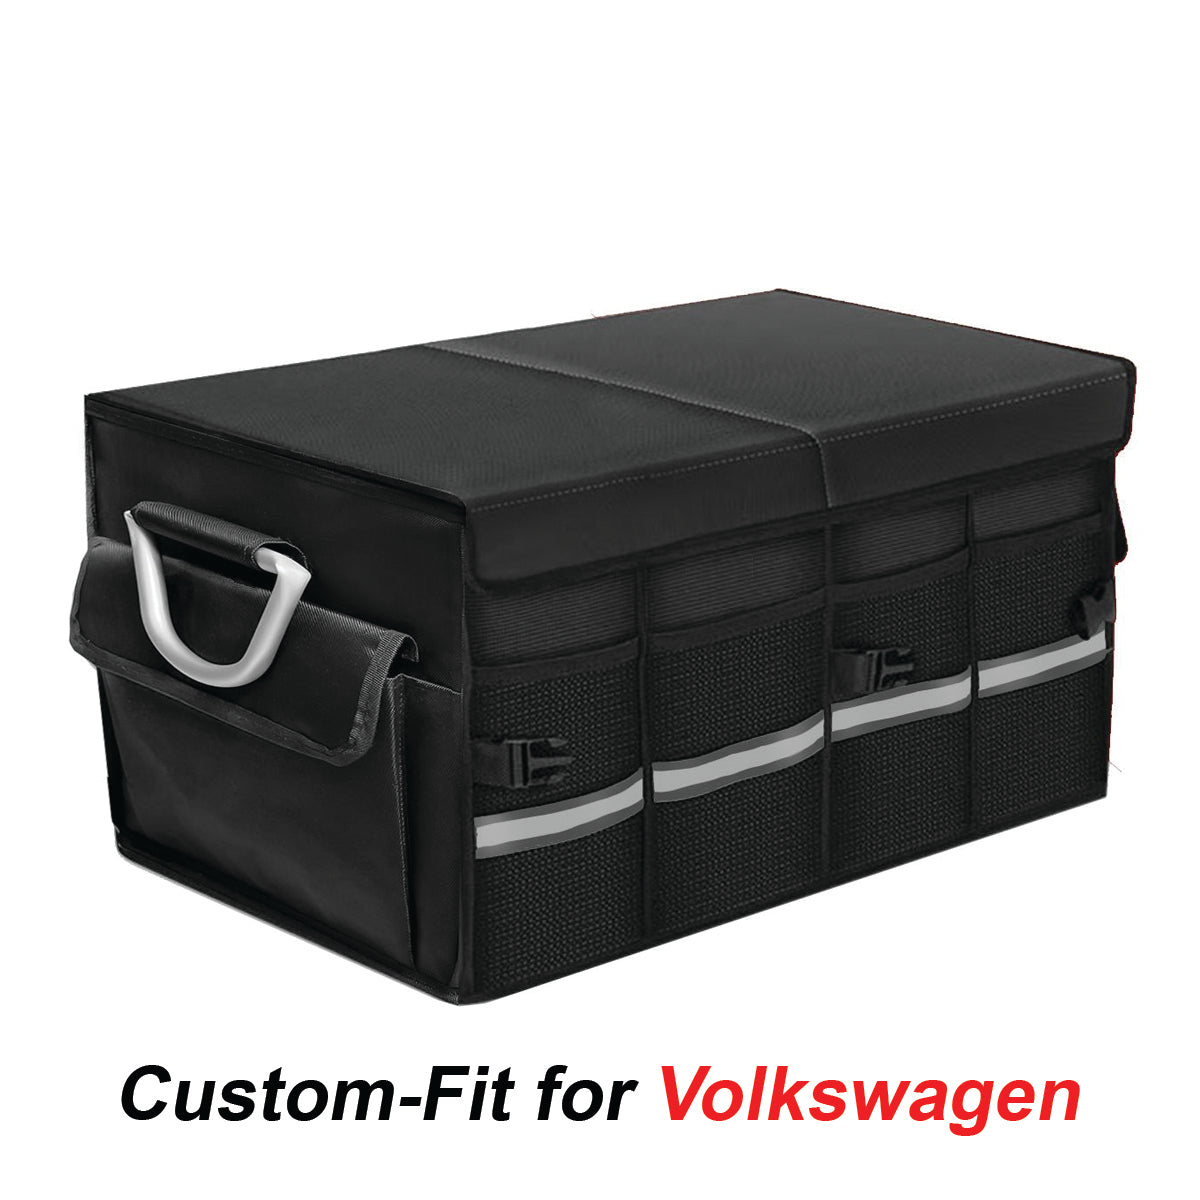 Big Trunk Organizer, Custom-Fit For Car, Cargo Organizer SUV Trunk Storage Waterproof Collapsible Durable Multi Compartments WaMY253